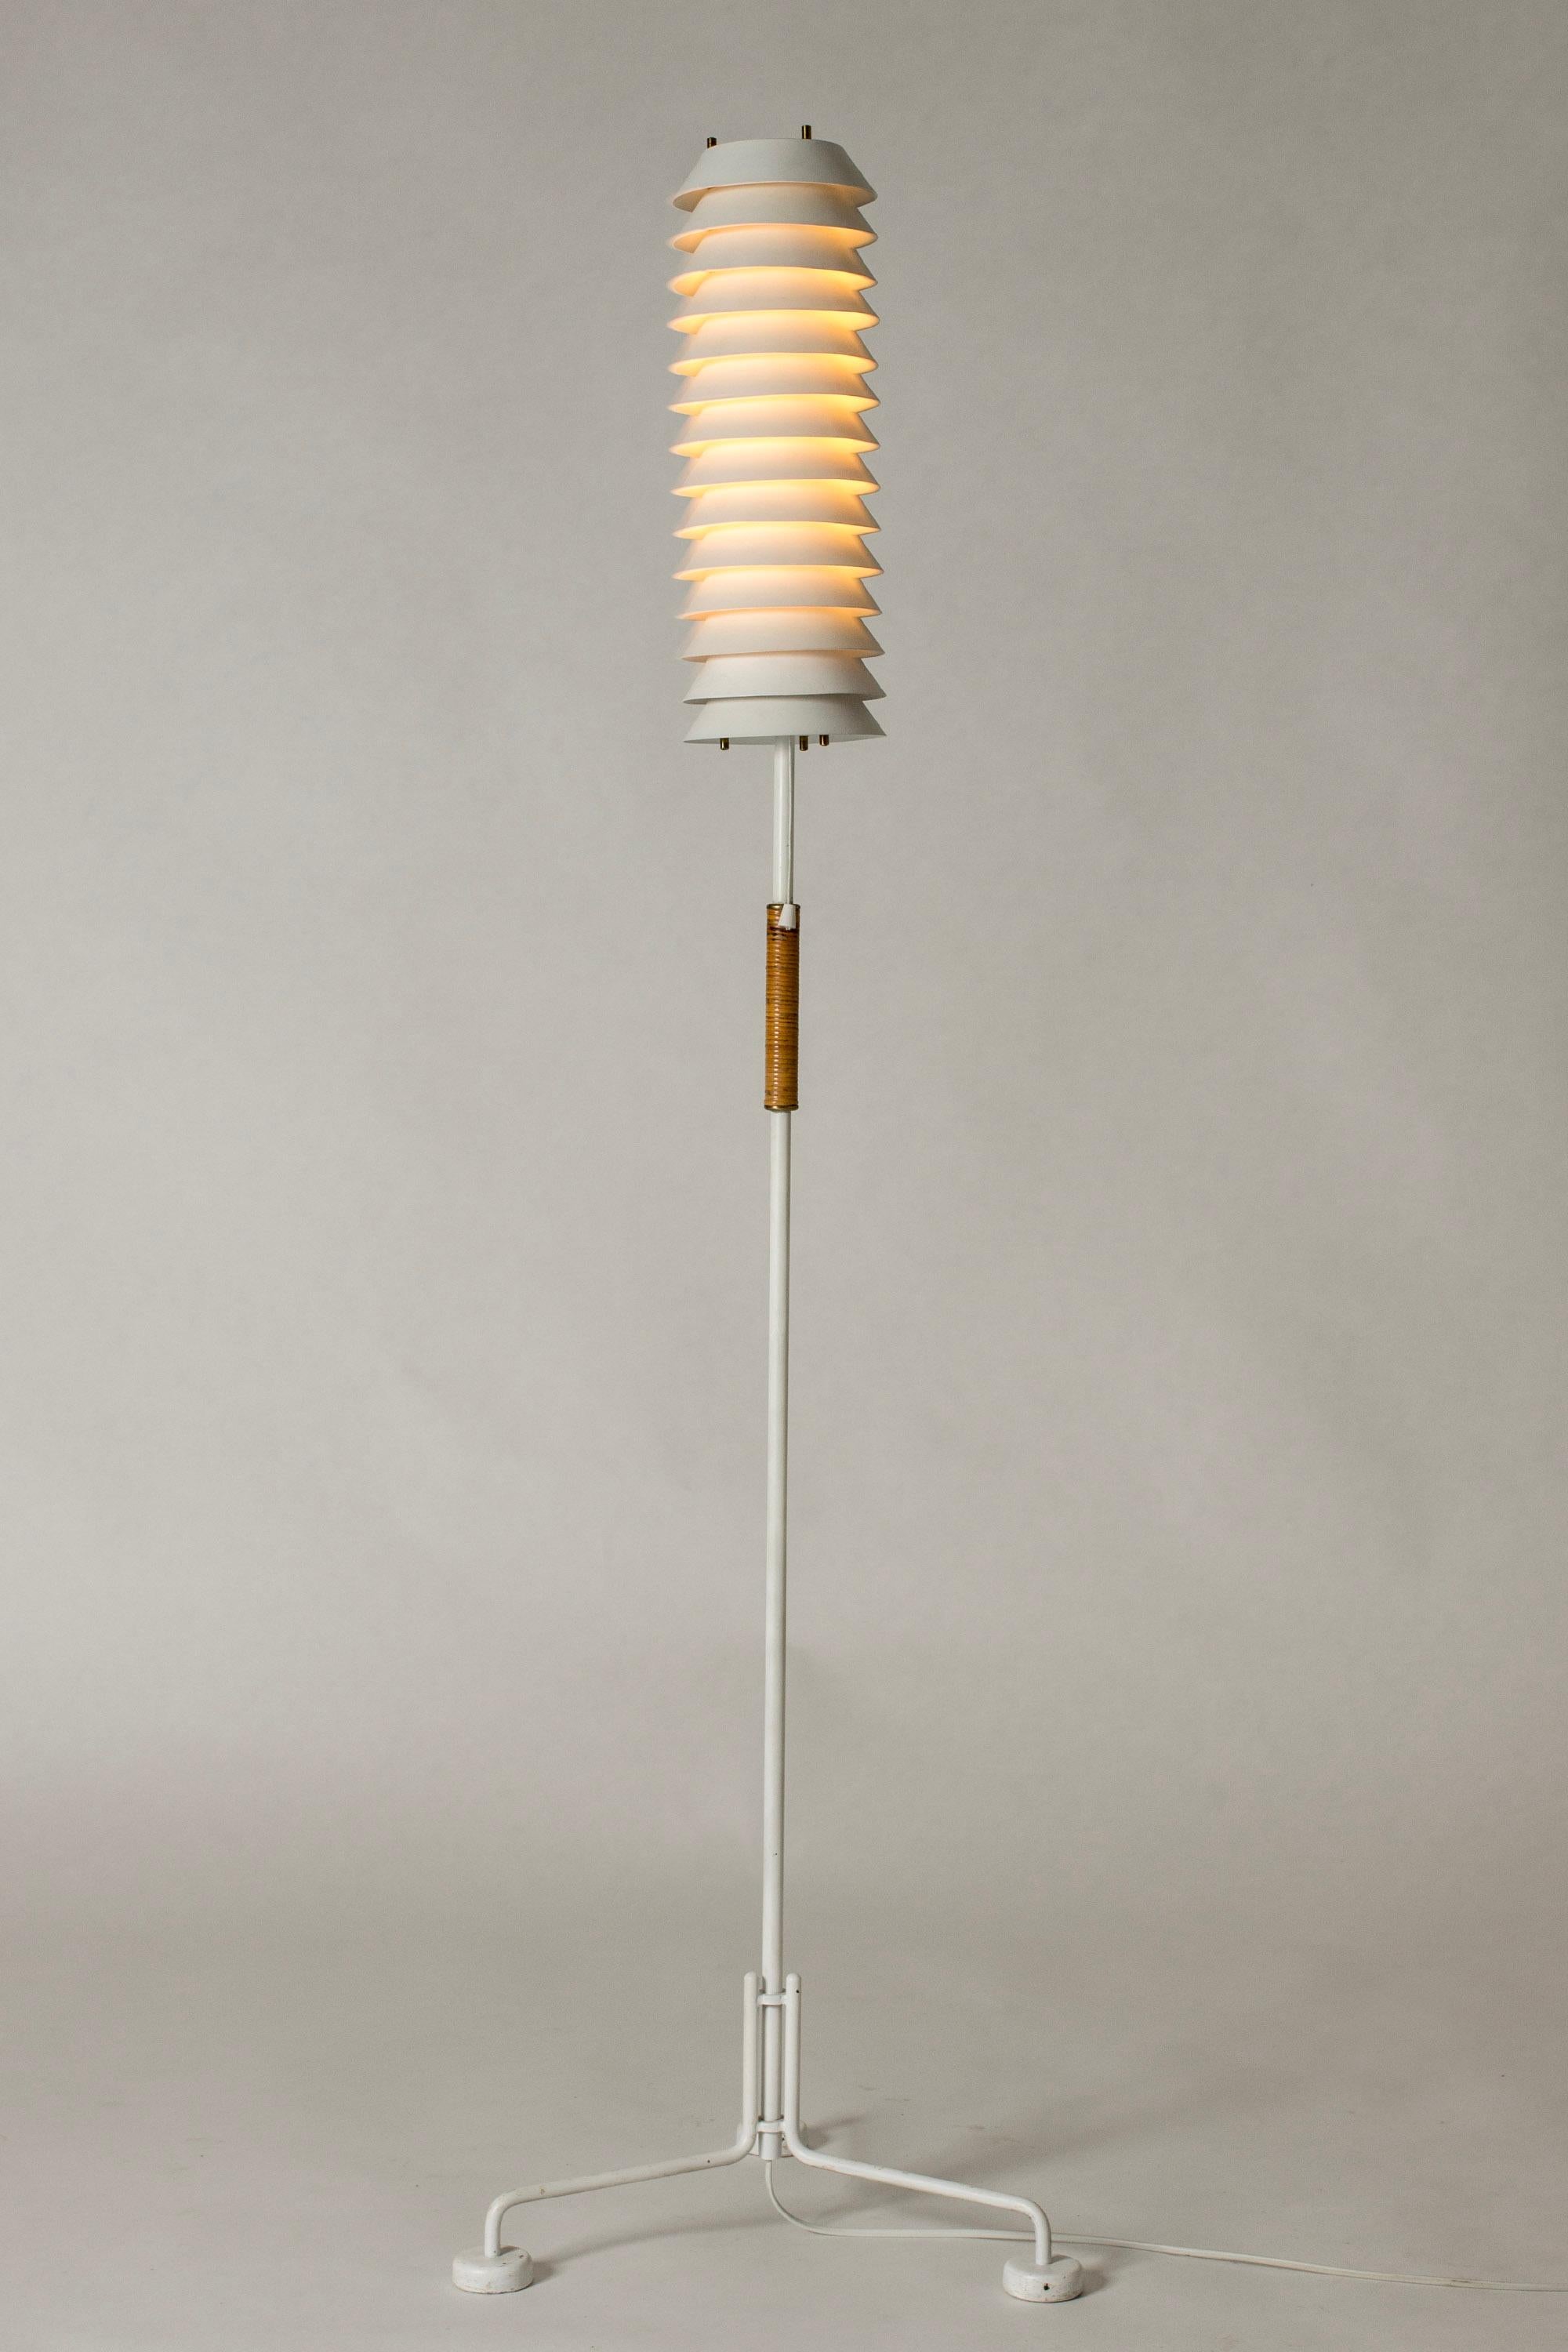 Striking “Maija Mehiläinen” (“Maija the Bee”) floor lamp by Ilmari Tapiovaara. Stacked white lacquered lamellas let out a soft light, contrasting industrial looking base. Rattan detail on the stem.